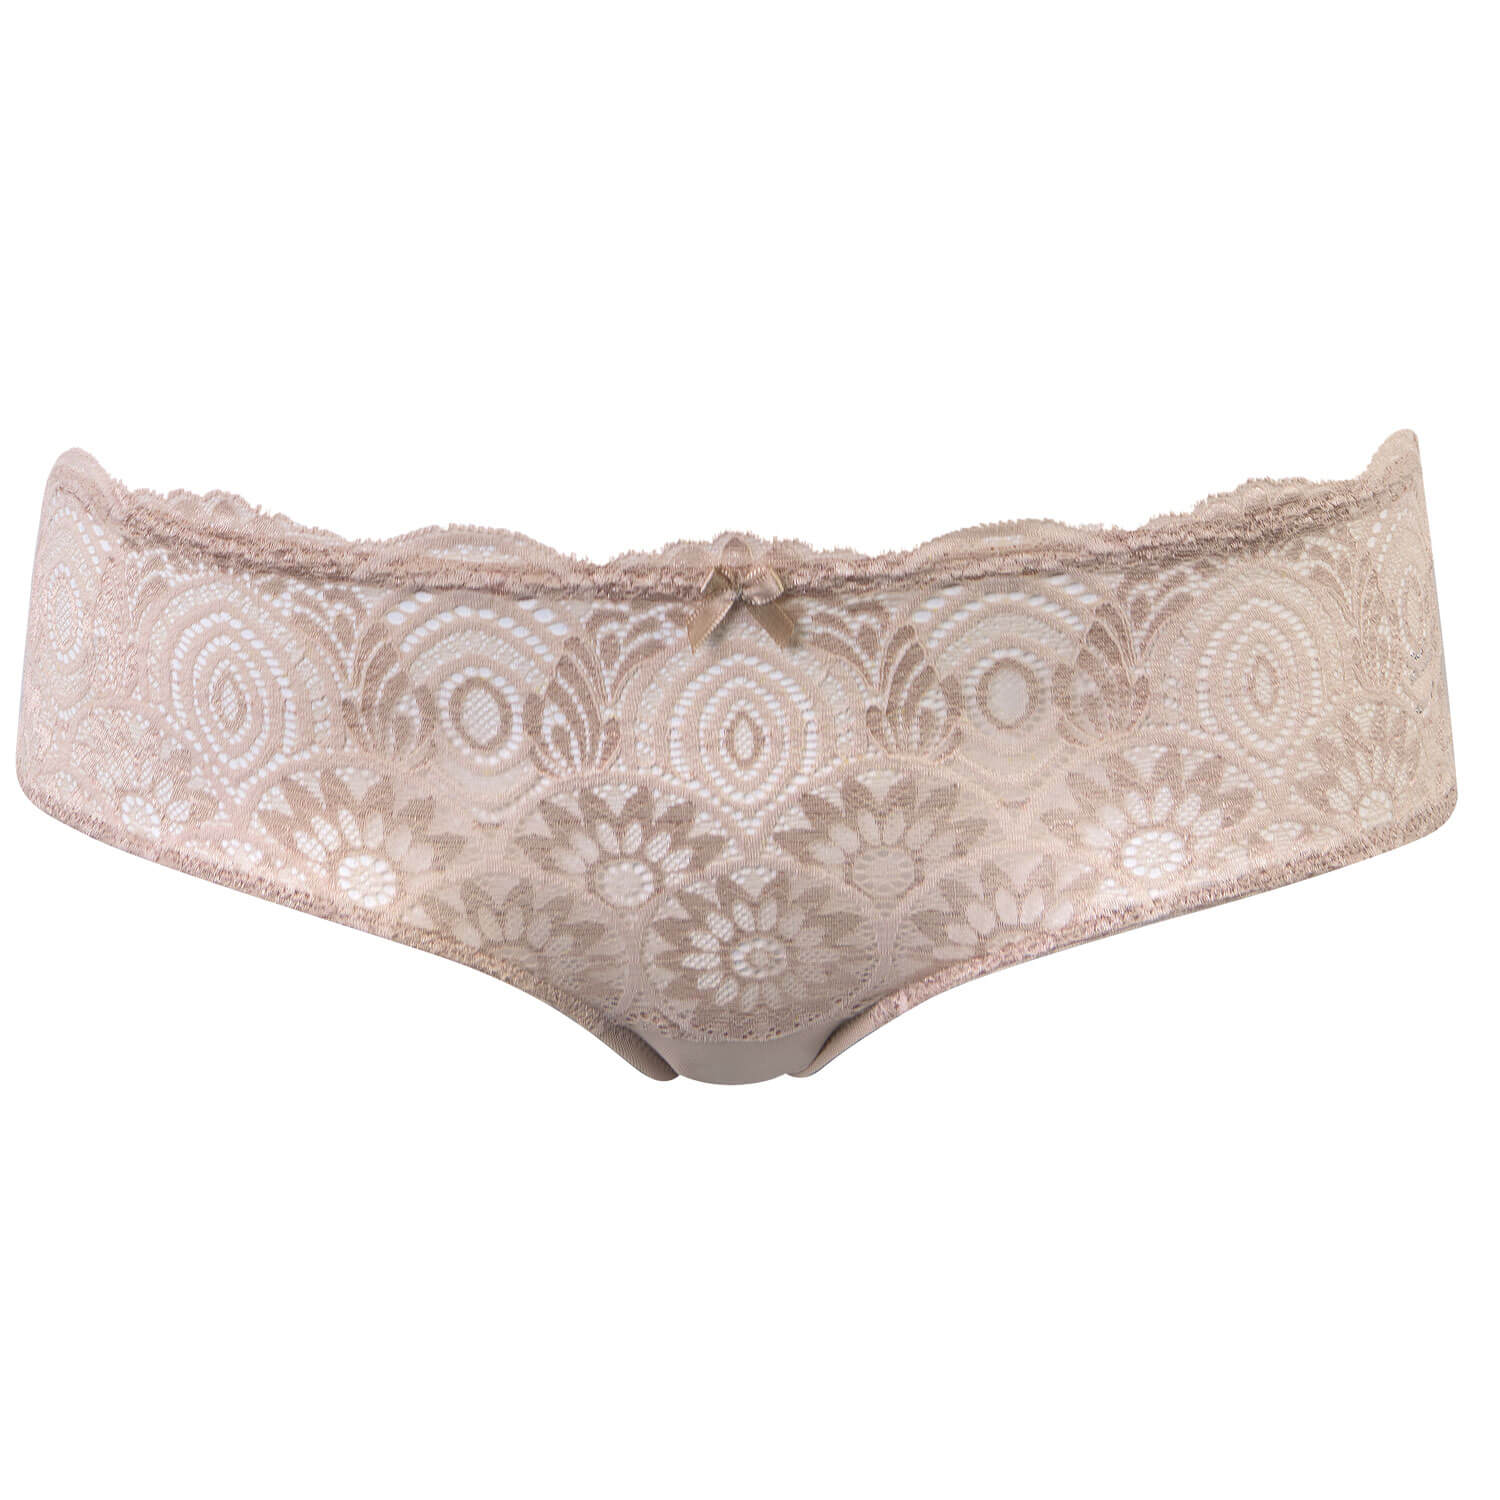 Refined Glamour Lace Shorty - Creamy Pearl